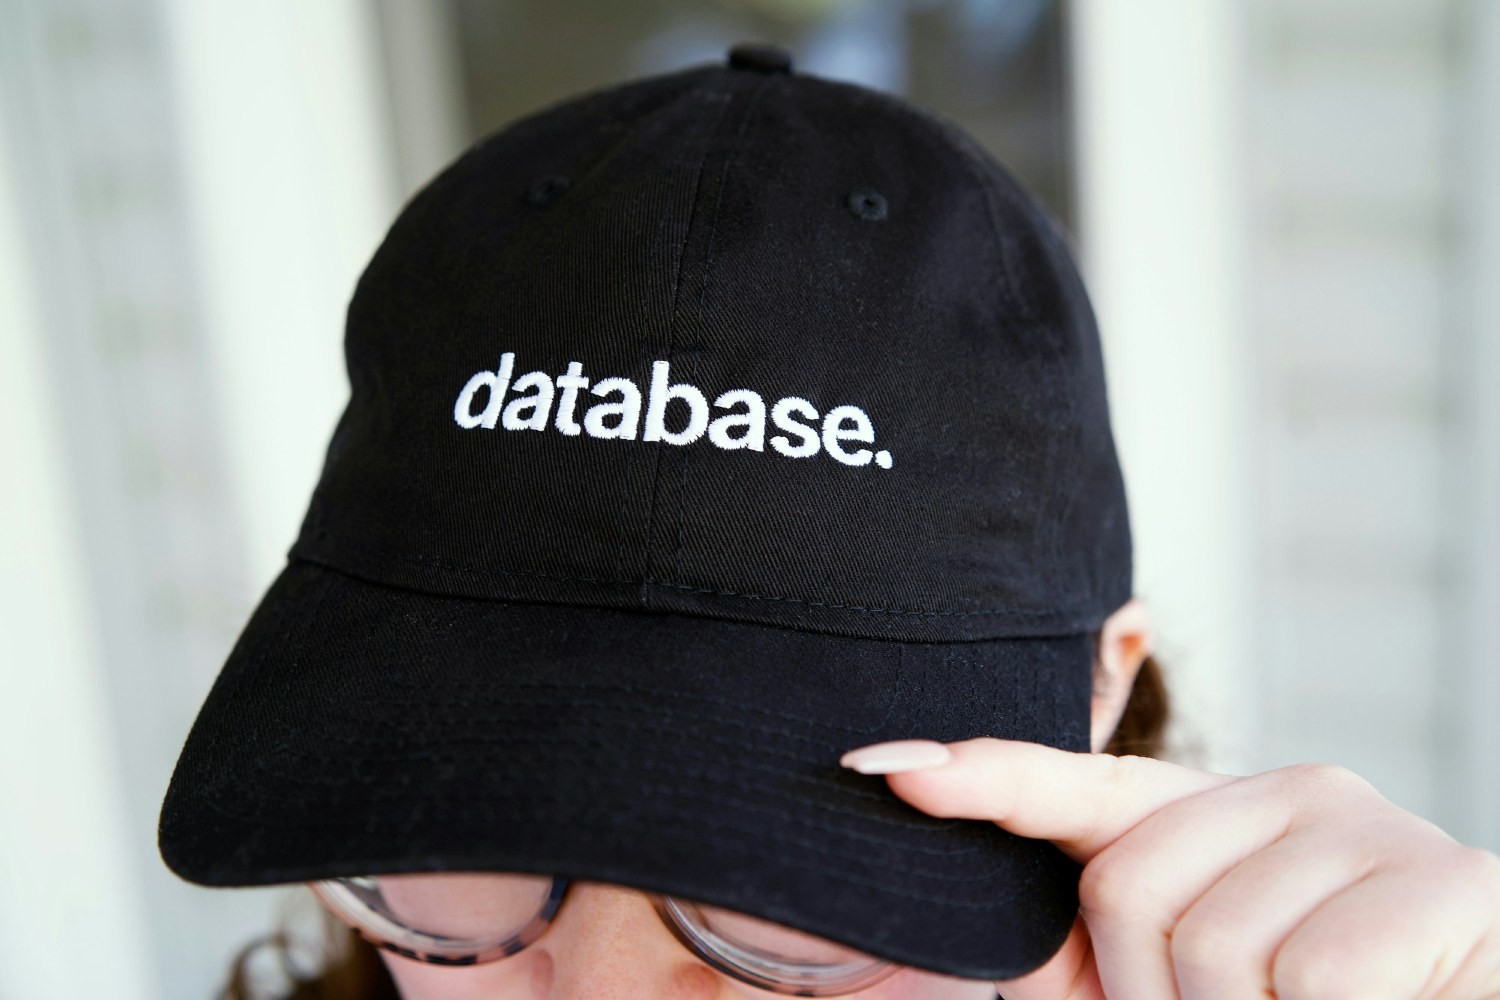 Our employees loving their database hats!